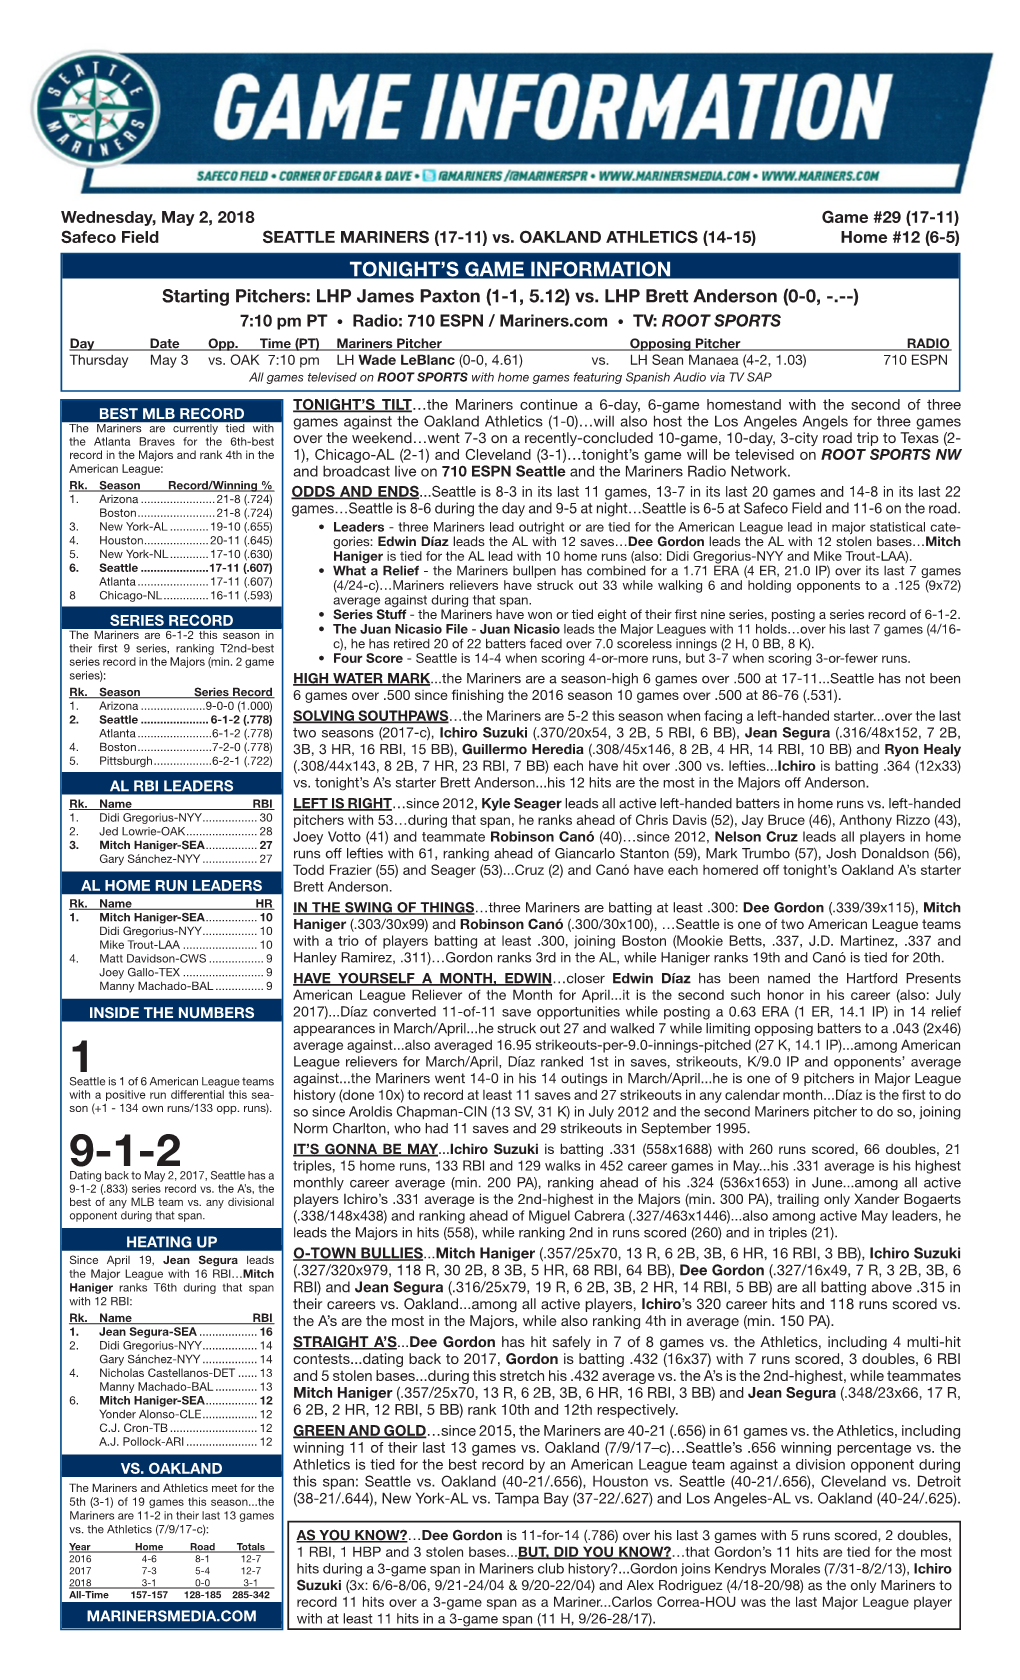 05-02-2018 Mariners Game Notes